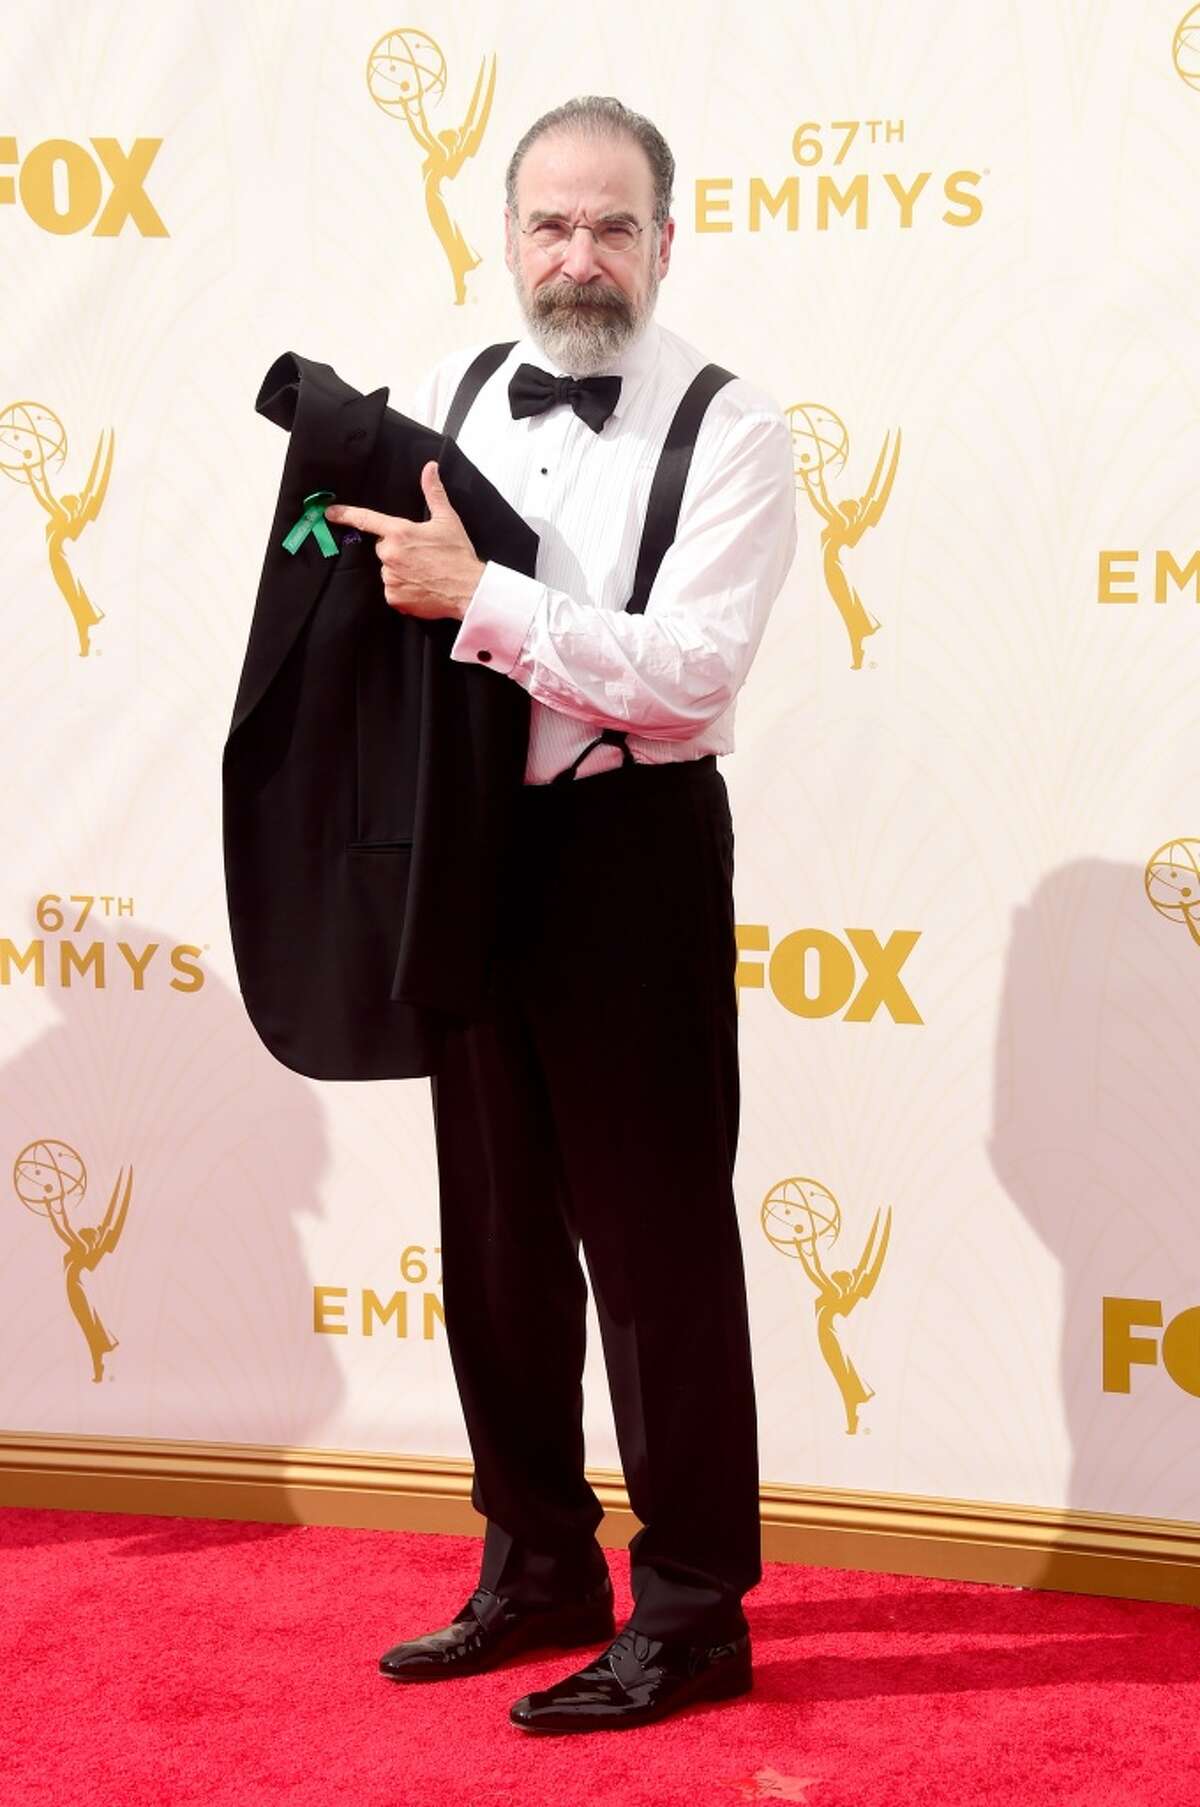 Actor Mandy Patinkin attends the 67th Annual Primetime Emmy Awards at Microsoft Theater on September 20, 2015 in Los Angeles, California. (Photo by Frazer Harrison/Getty Images)